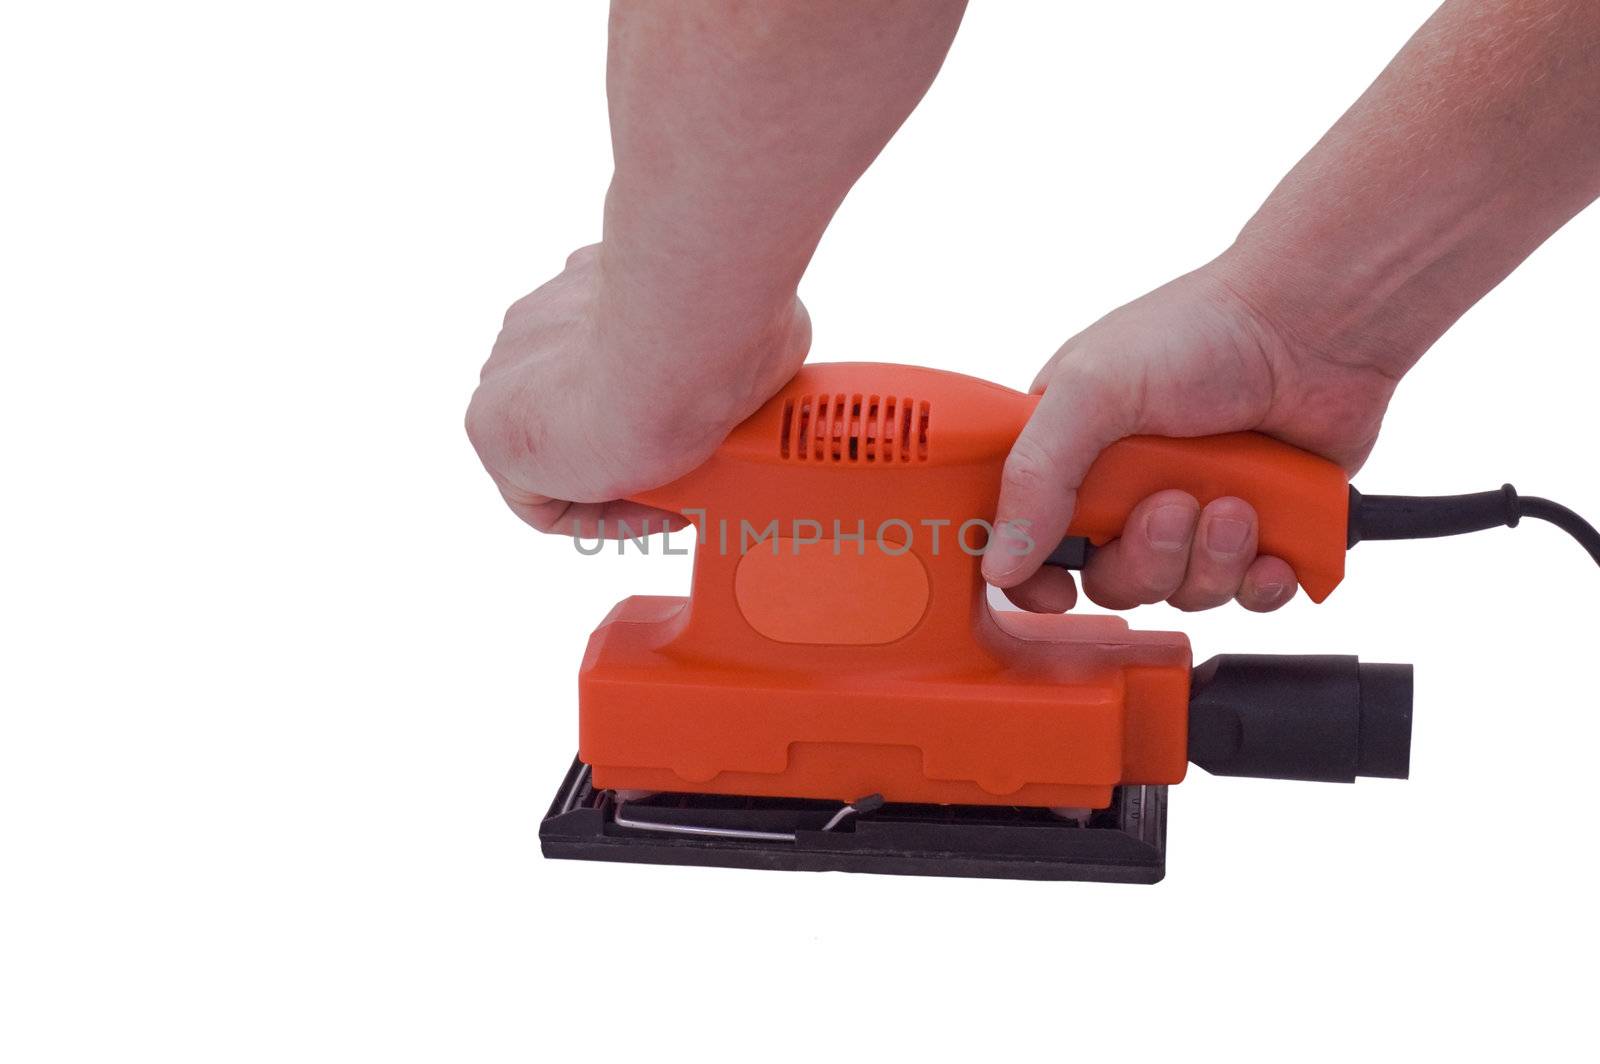 an isolated over white image of a Orange orbitol sander being held by two caucasian male hands.